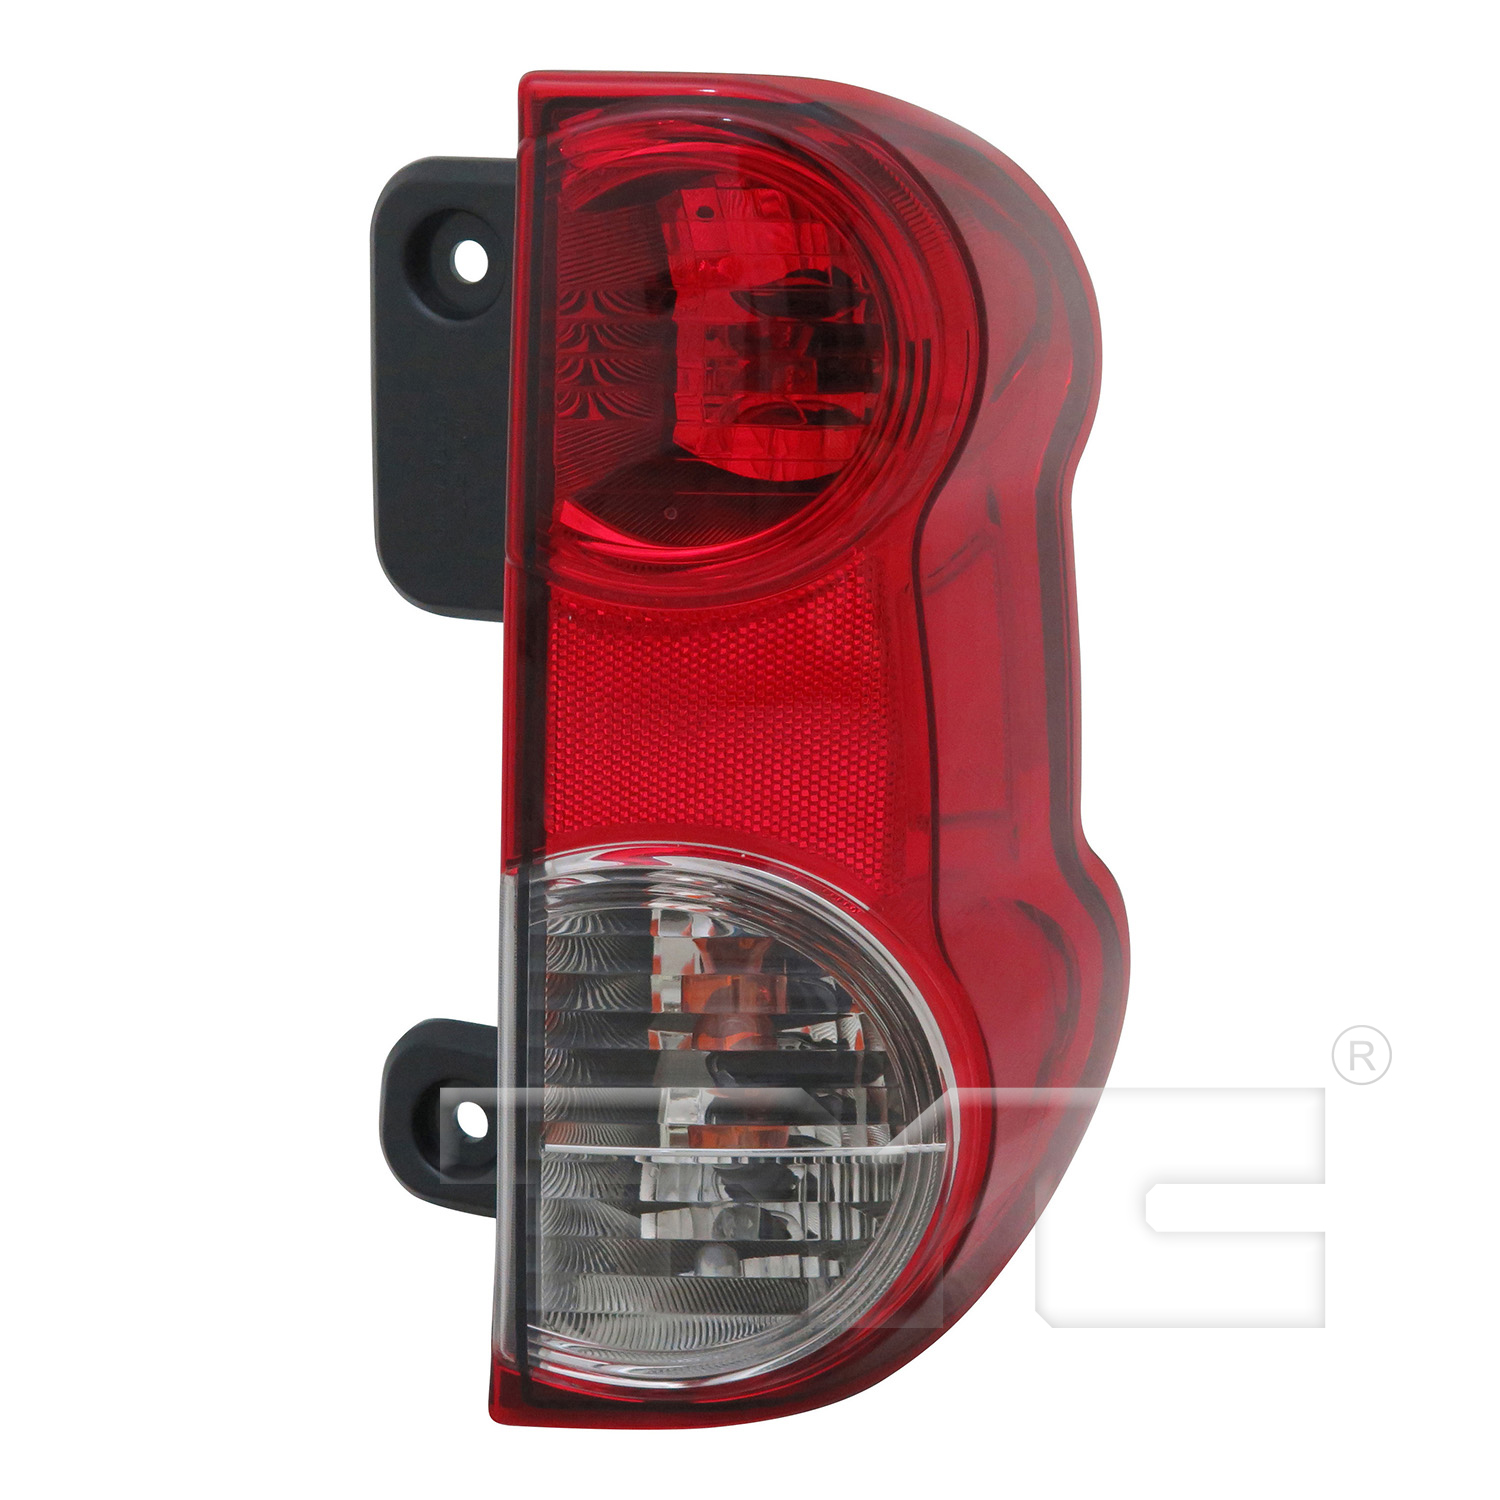 Aftermarket TAILLIGHTS for NISSAN - NV200, NV200,13-21,RT Taillamp assy